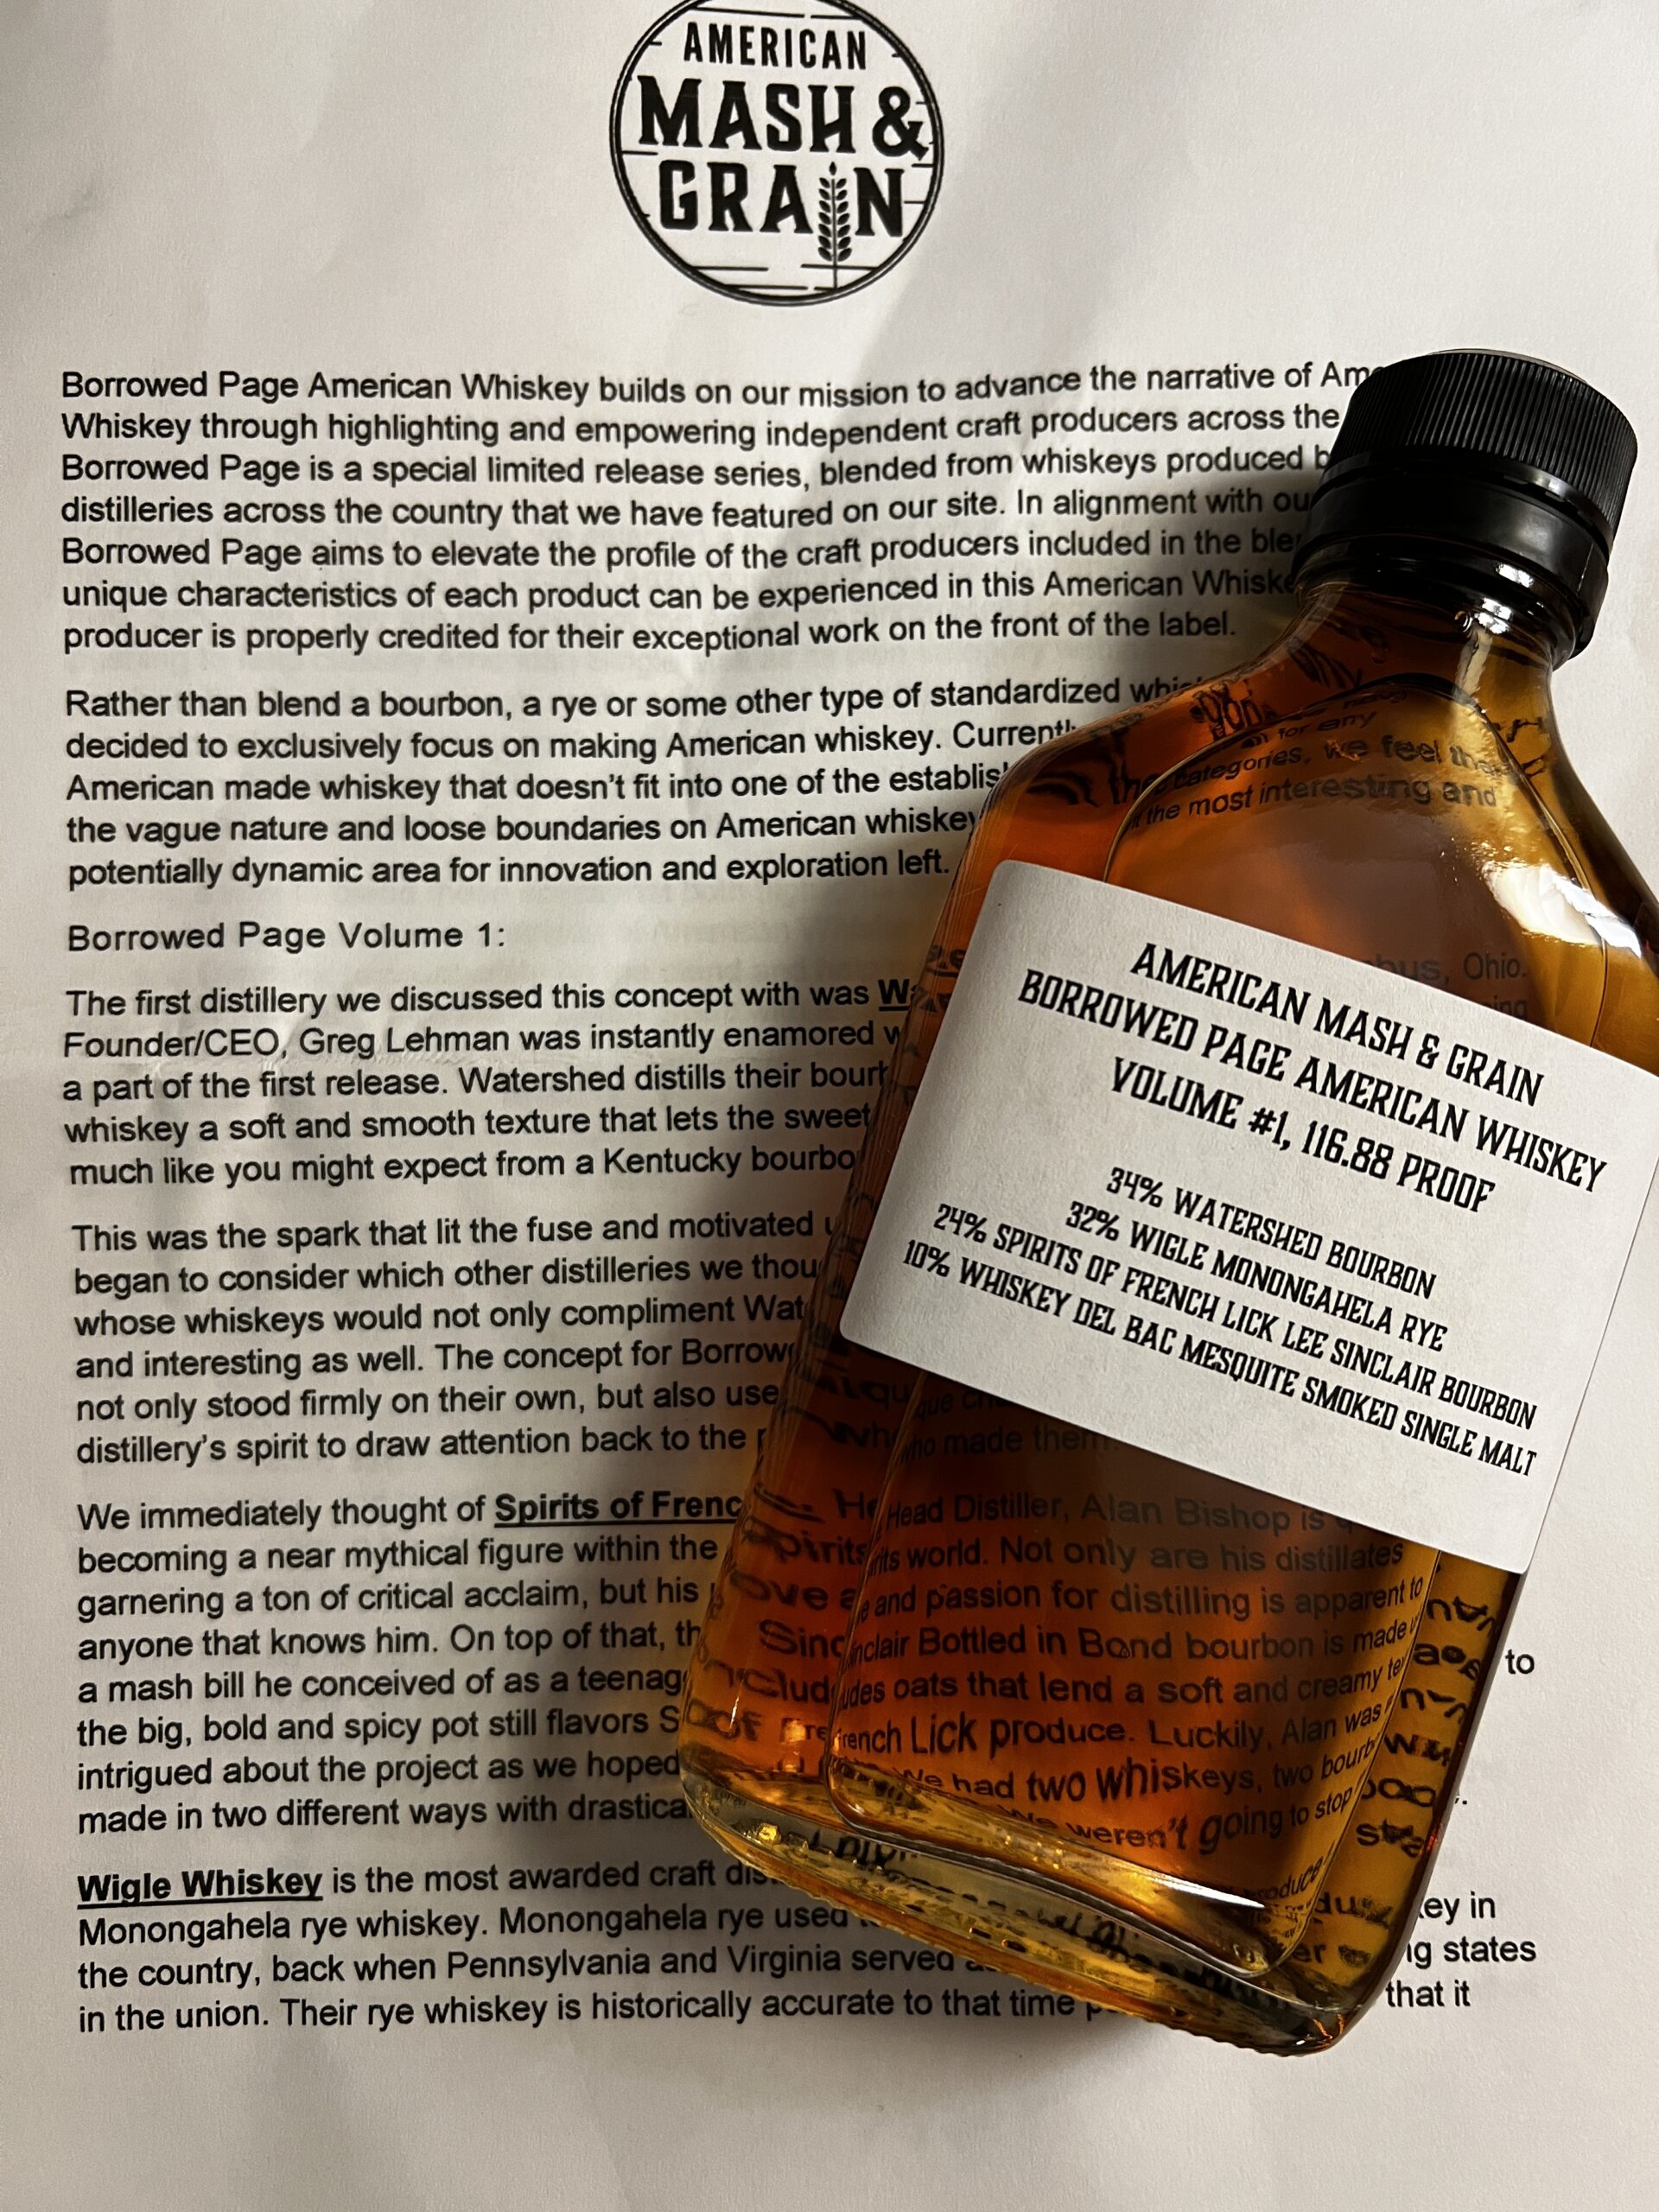 Mash & Grain Borrowed Page Delivers a Unique Blend of Craft Whiskey